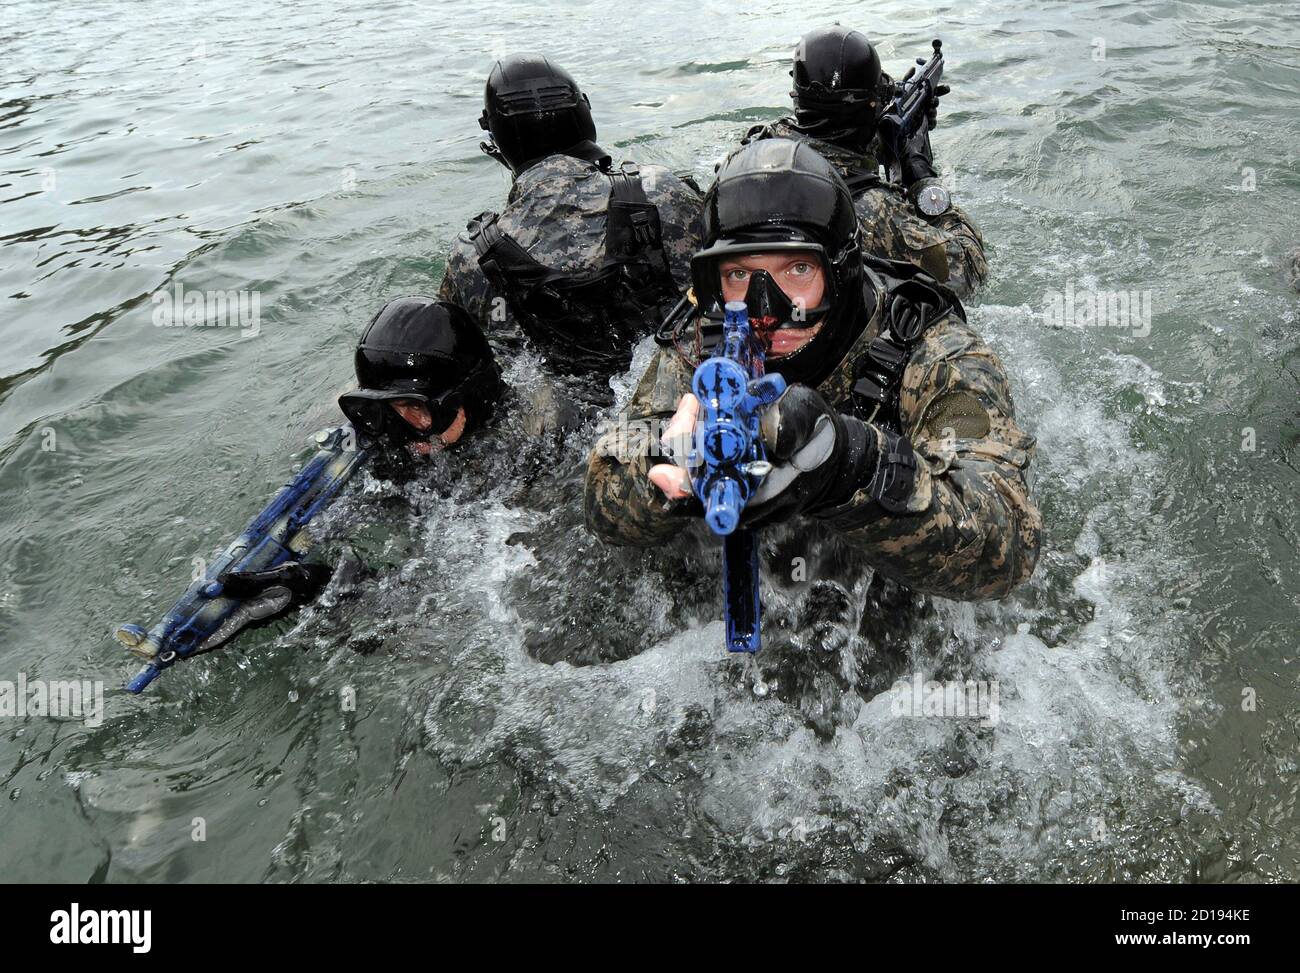 Members of Gruppo di Intervento Speciale (Special Intervention Group) force  unit of the Italian Carabinieri military police train during an anti-terror  drill near Livorno's harbour, central Italy, April 21 2009.  REUTERSAlessandro Bianchi (